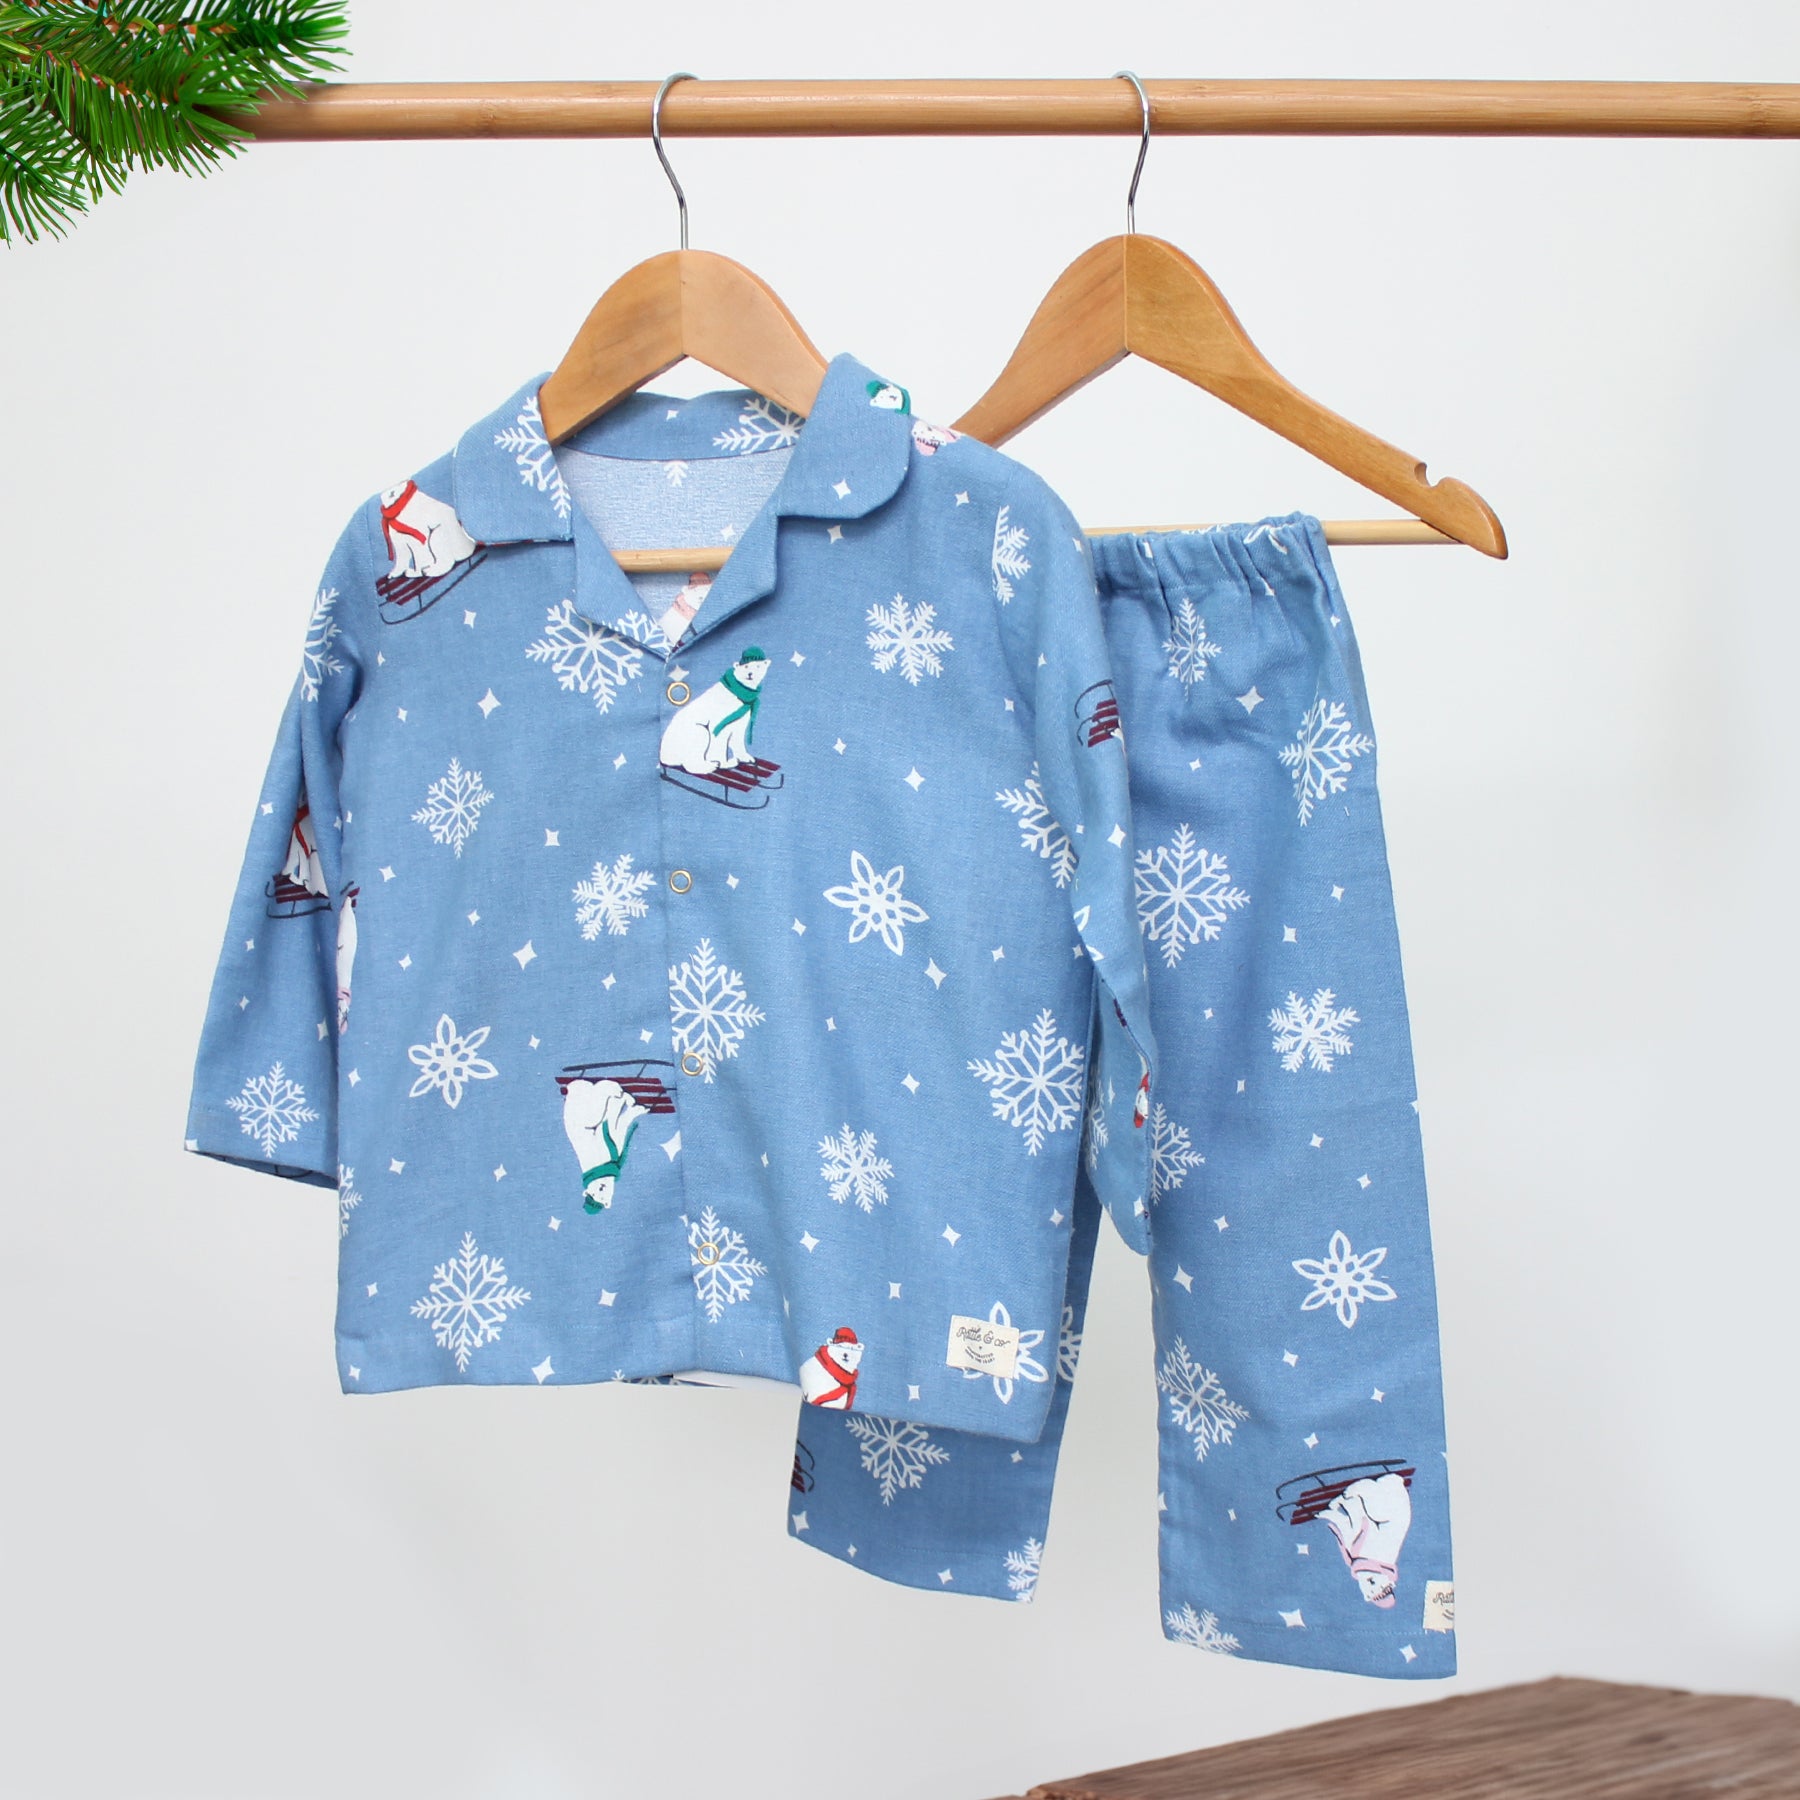 Snow Much Style Flannel Jammies Set For Kids